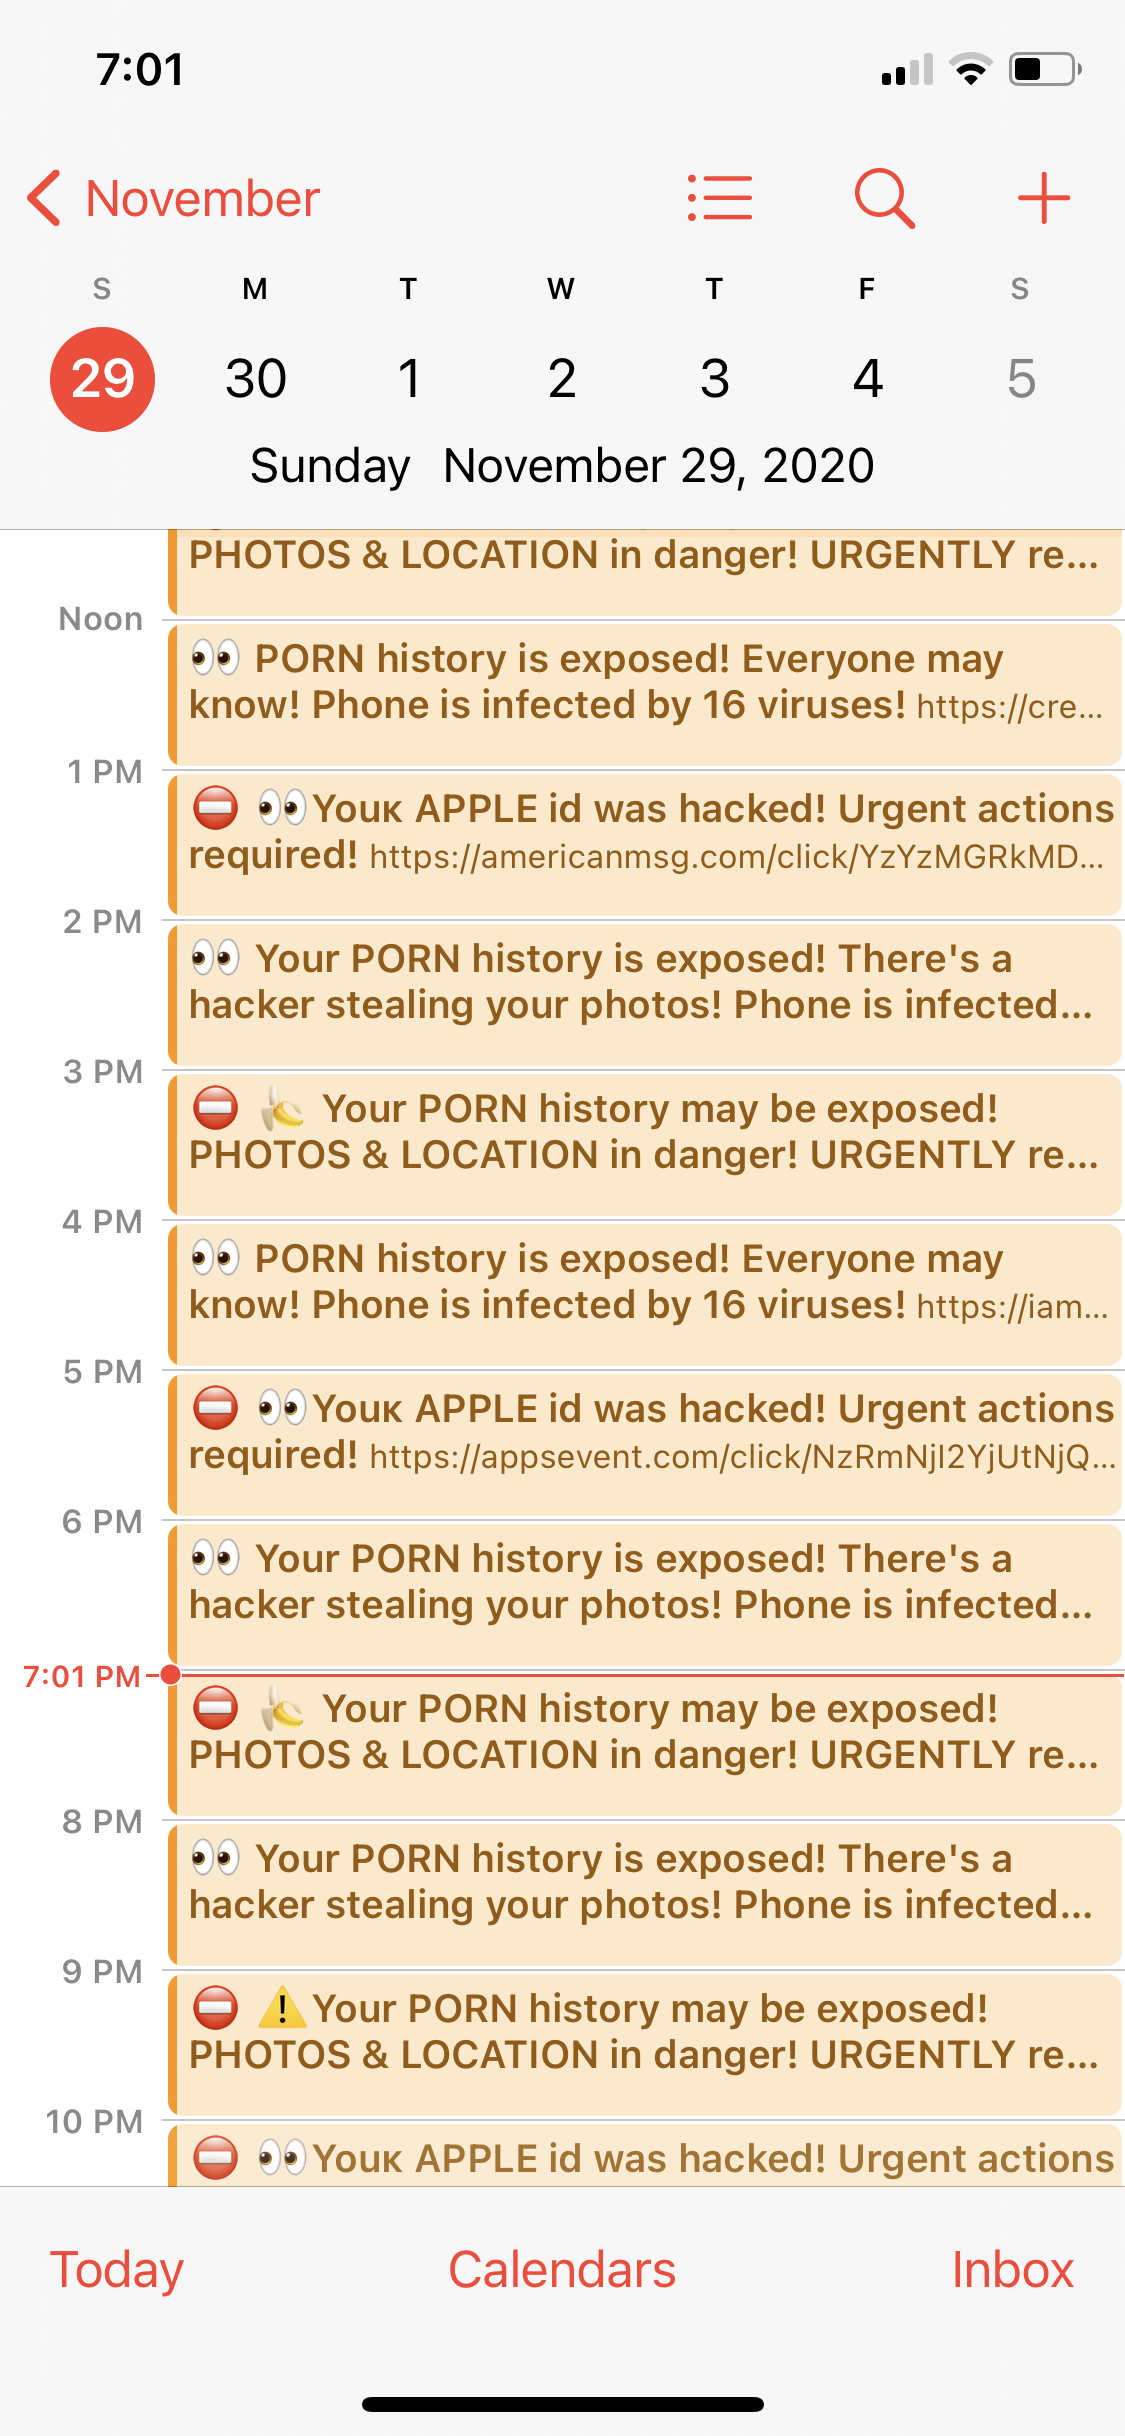 Iphone hacked by ads calendar